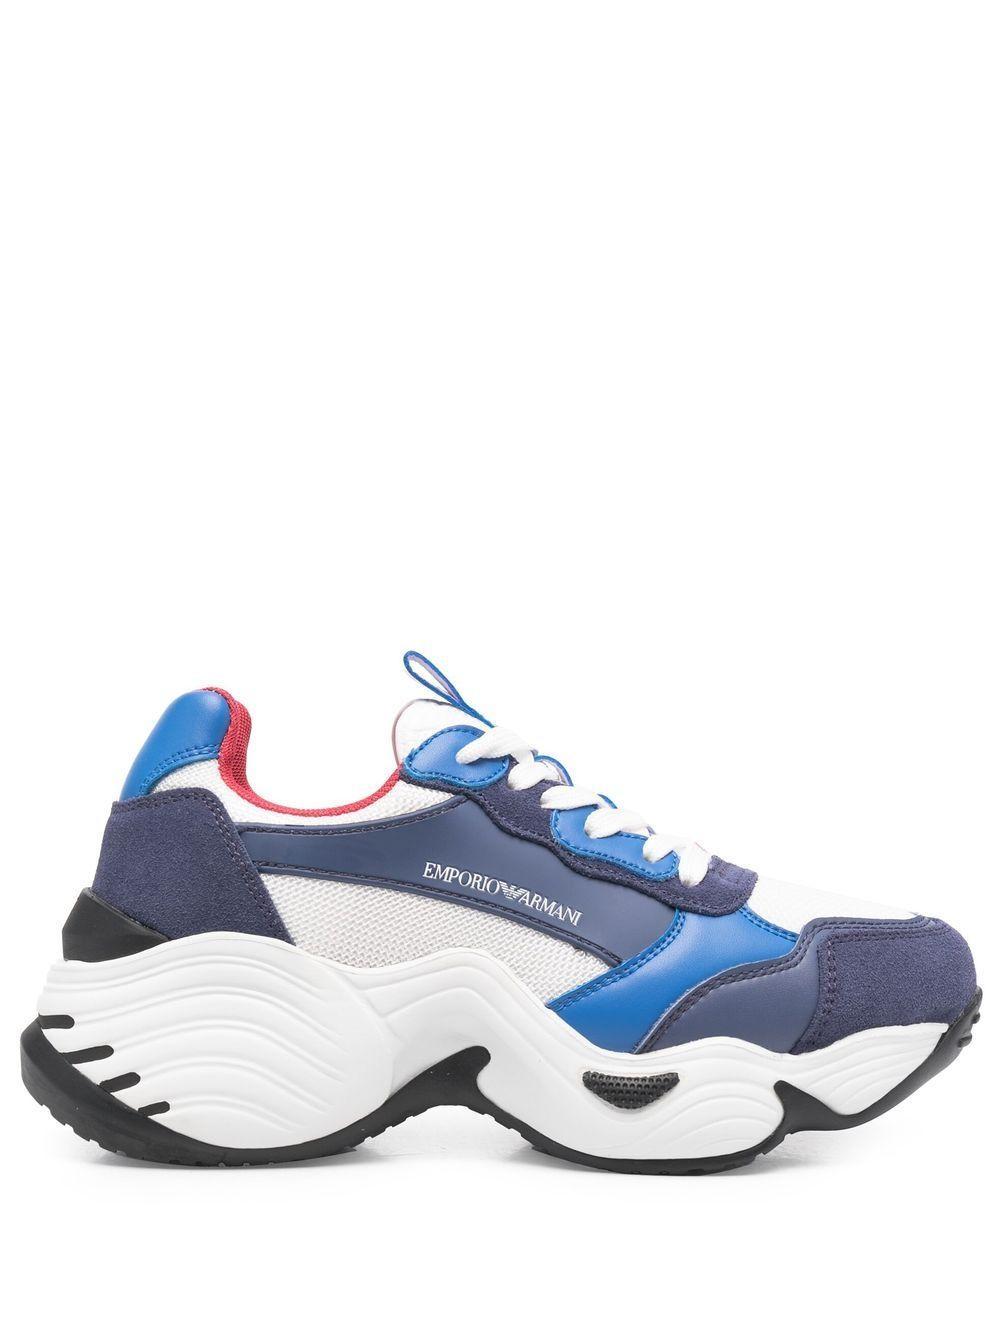 Emporio Armani Chunky Colour-block Sneakers in Blue - Save 46% | Lyst